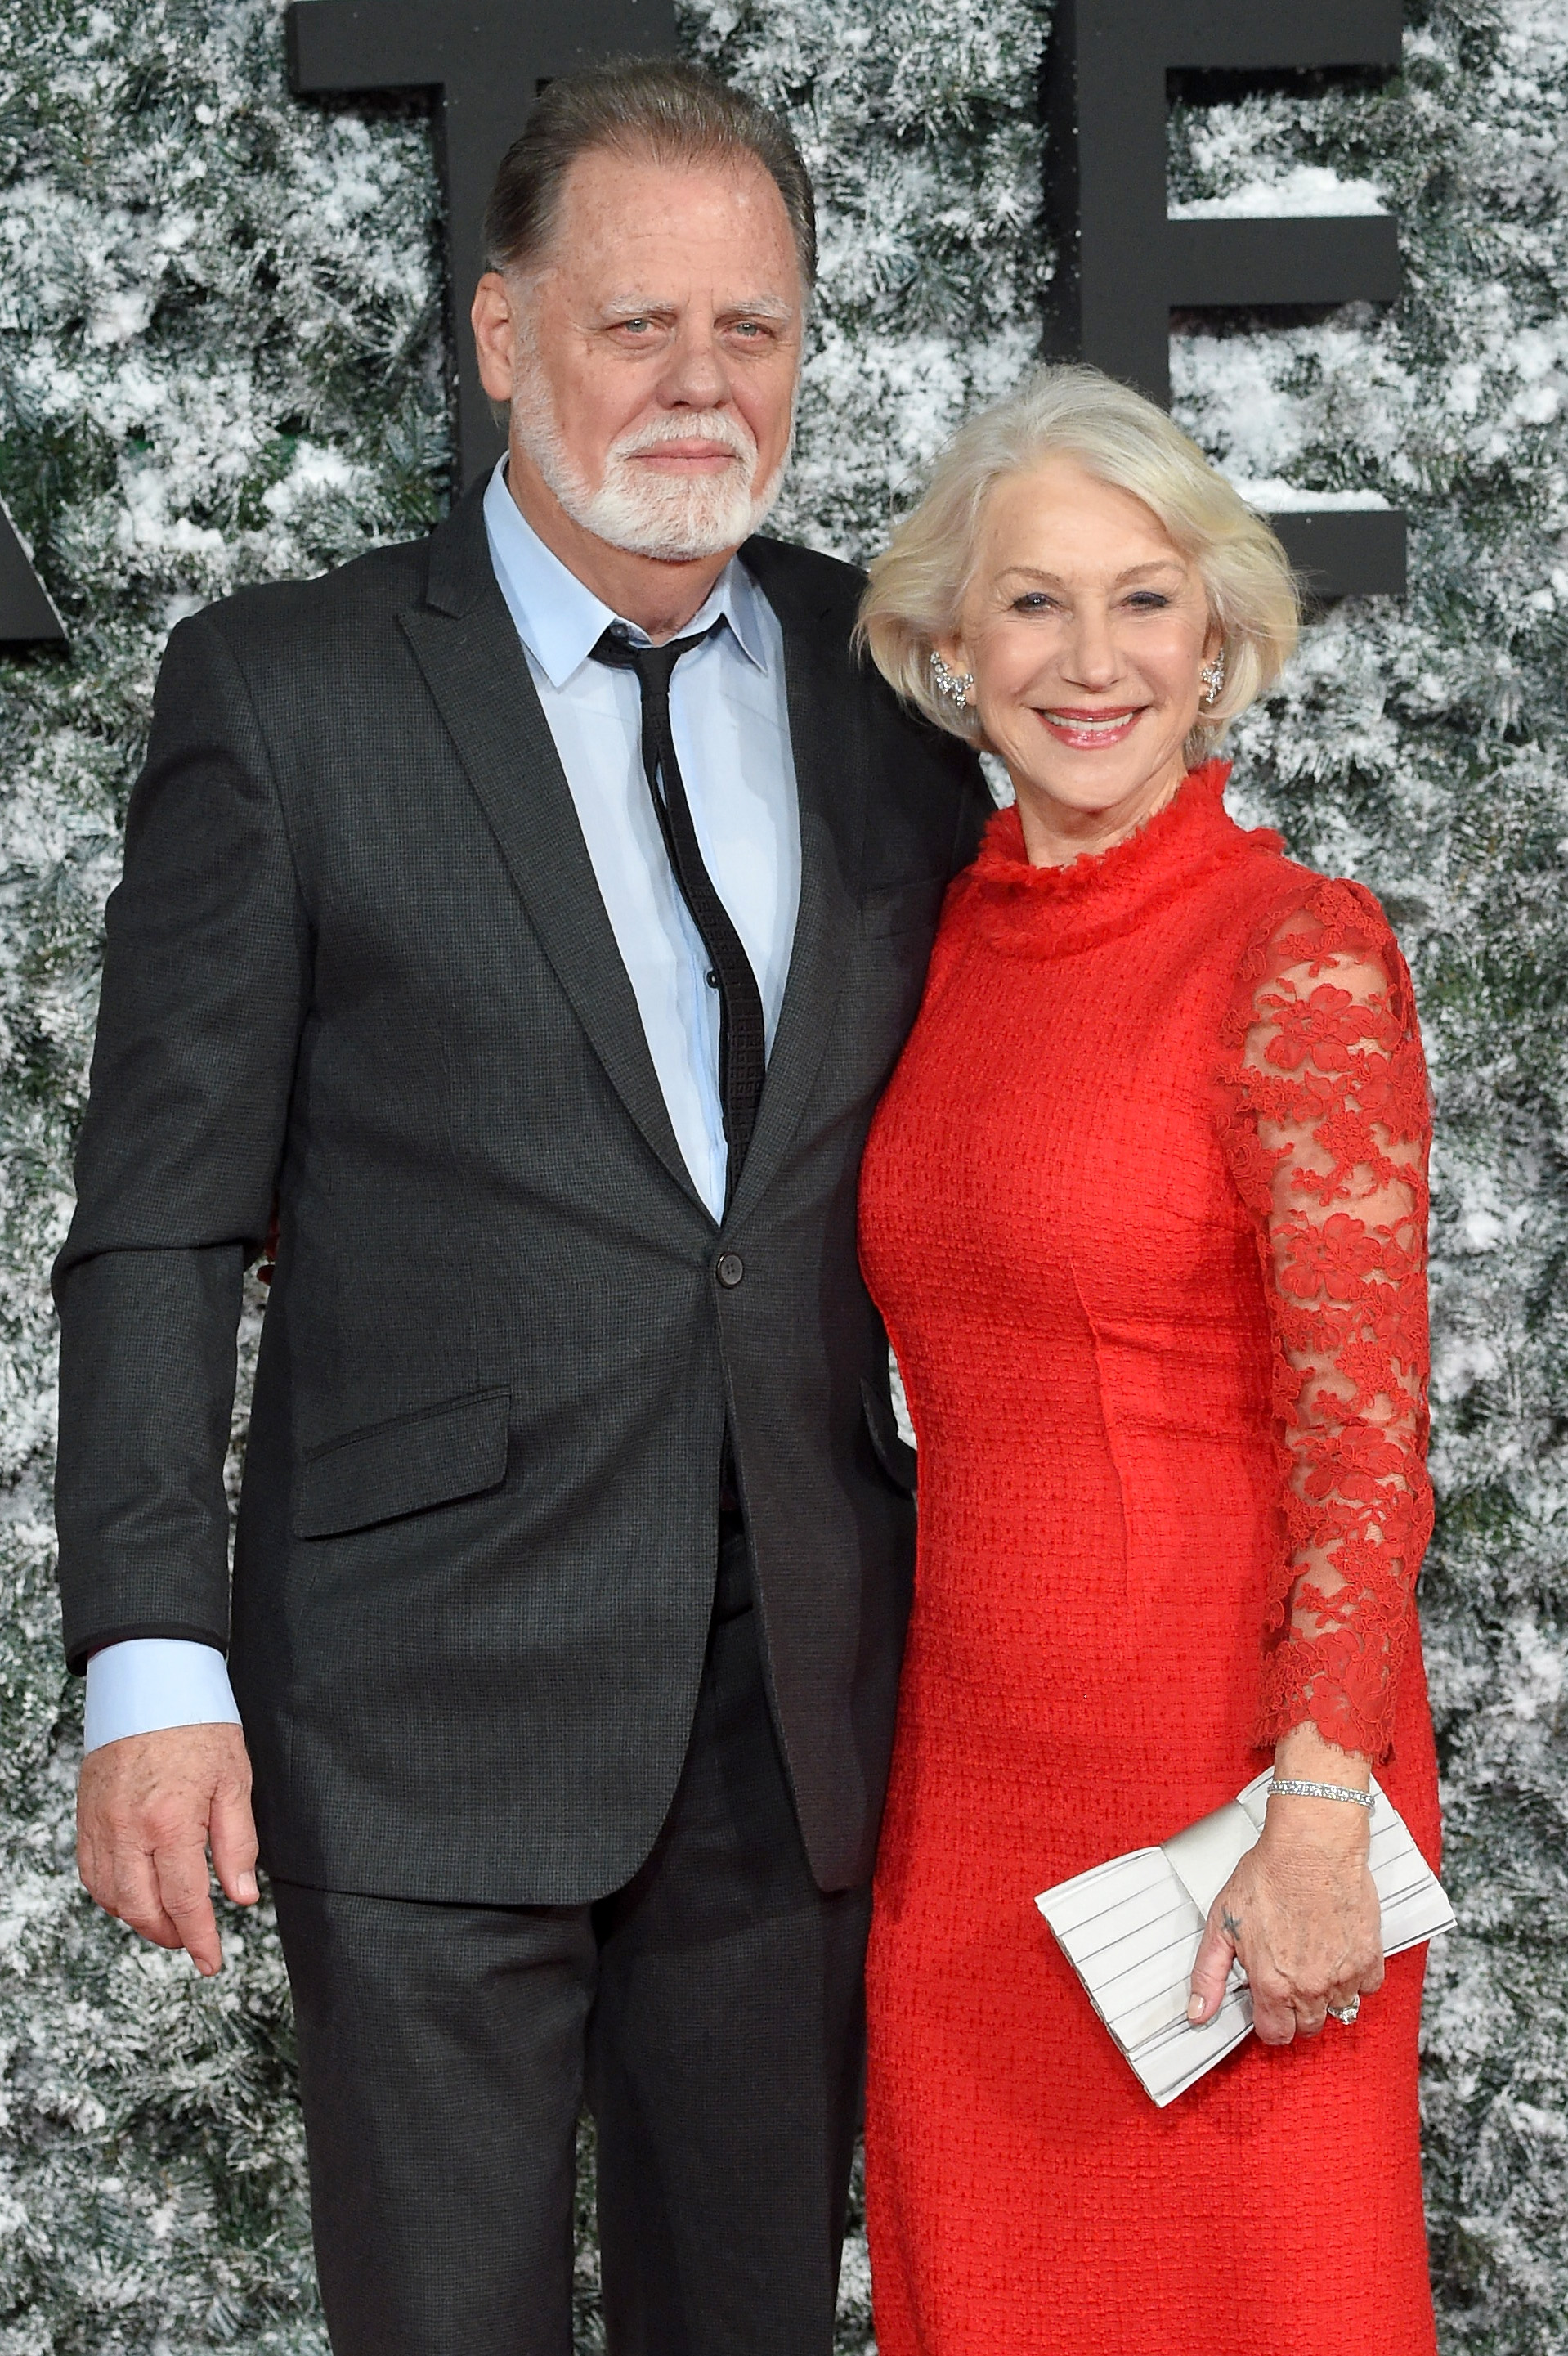 Taylor Hackford and Dame Helen Mirren in London, England on December 15, 2016 | Source: Getty Images